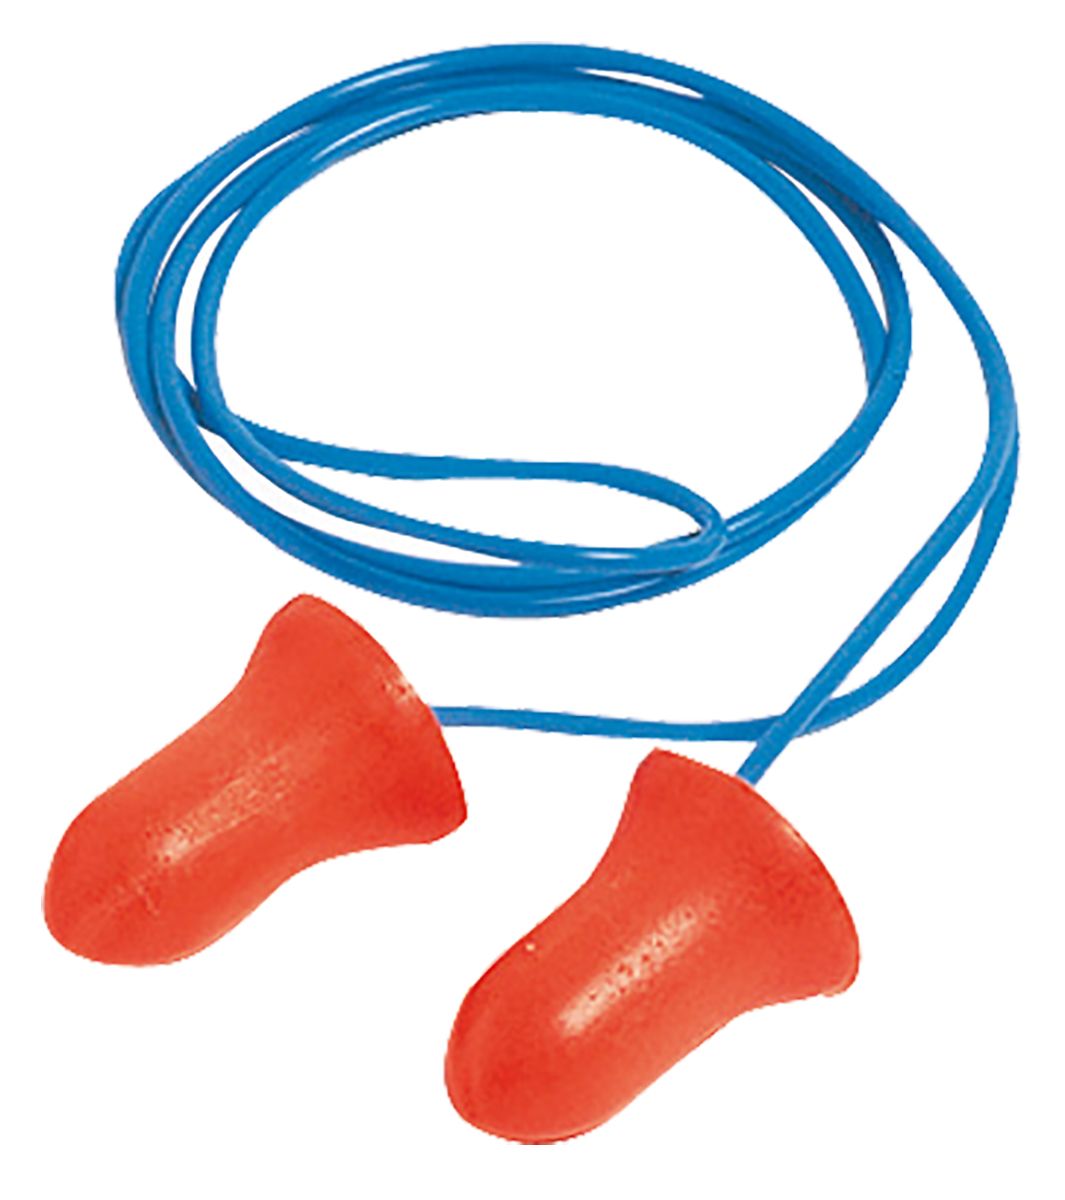 Honeywell Safety Corded Disposable Ear Plugs, 37dB, Blue, Orange, 100 Pairs per Package